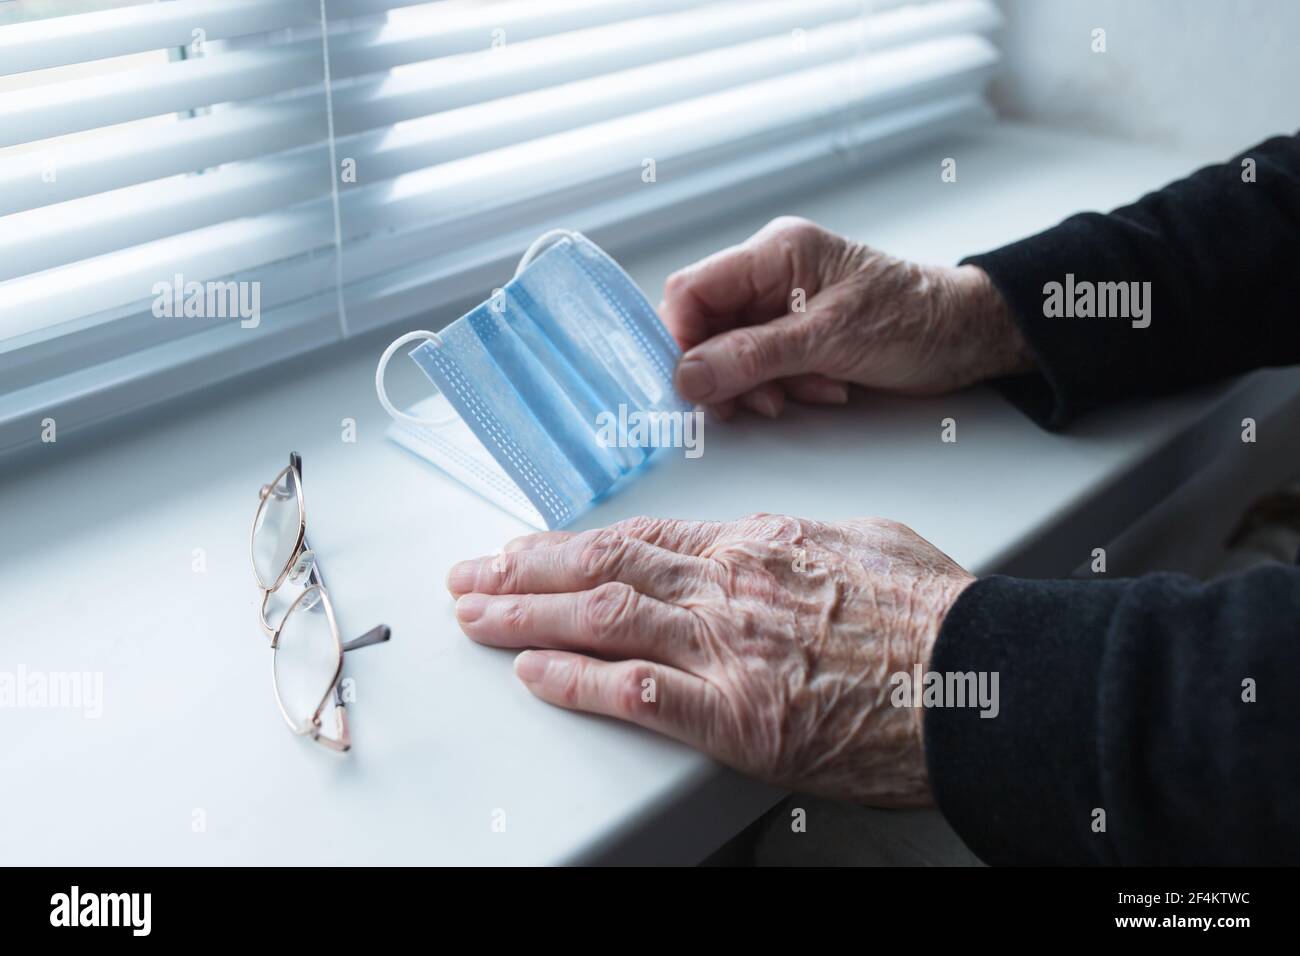 Old people during quarantine spending time mostly at home. Stock Photo